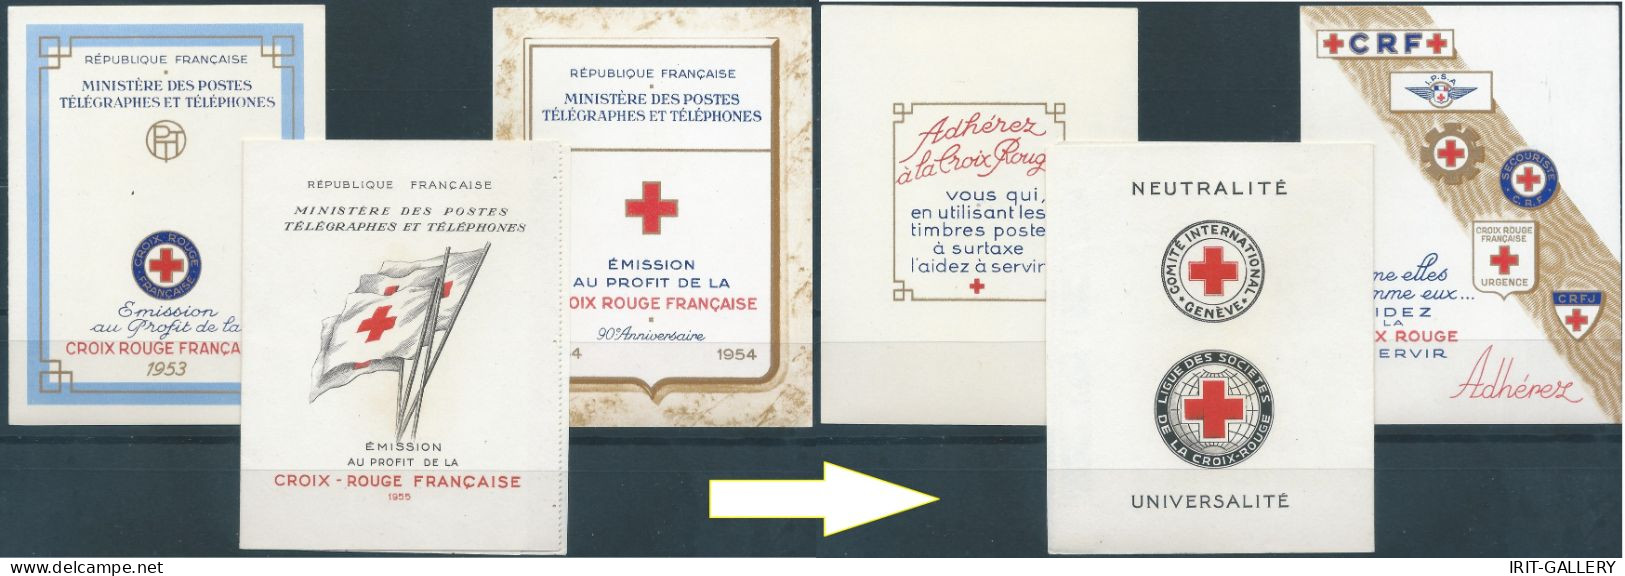 FRANCE,French, Croix Rouge  - Red Cross 1953 - 1954 - 1955  , 3 Booklets With Blocks Of MNH Stamps,Rare - Rotes Kreuz